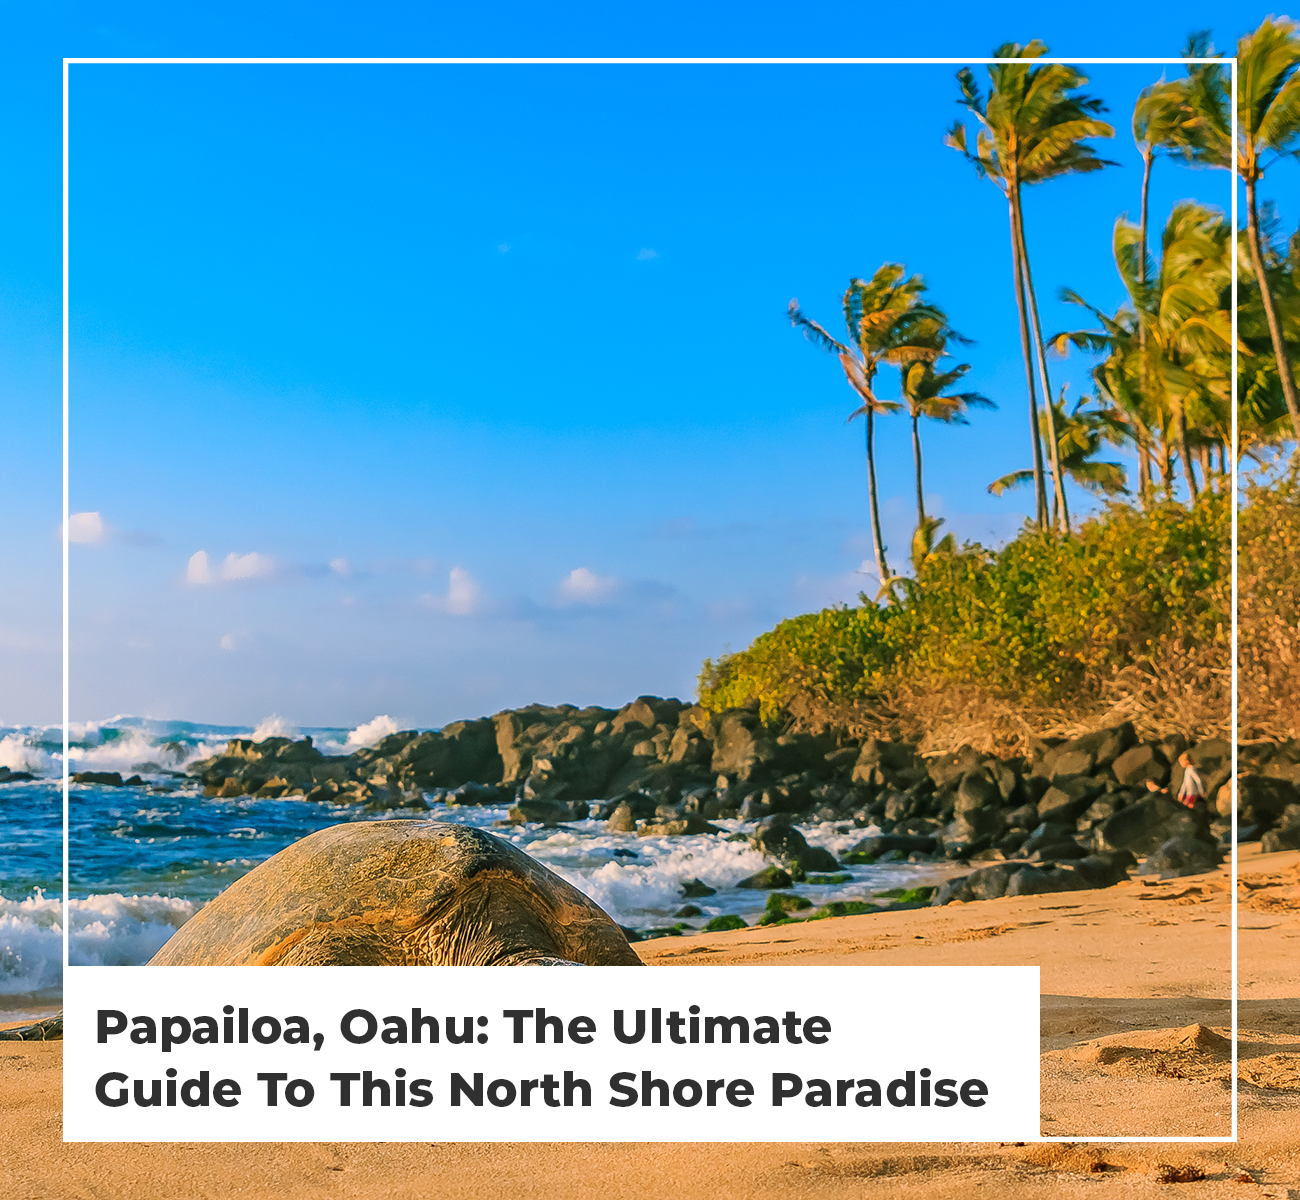 Papailoa, Oahu: The Ultimate Guide To This North Shore Paradise - Main Image